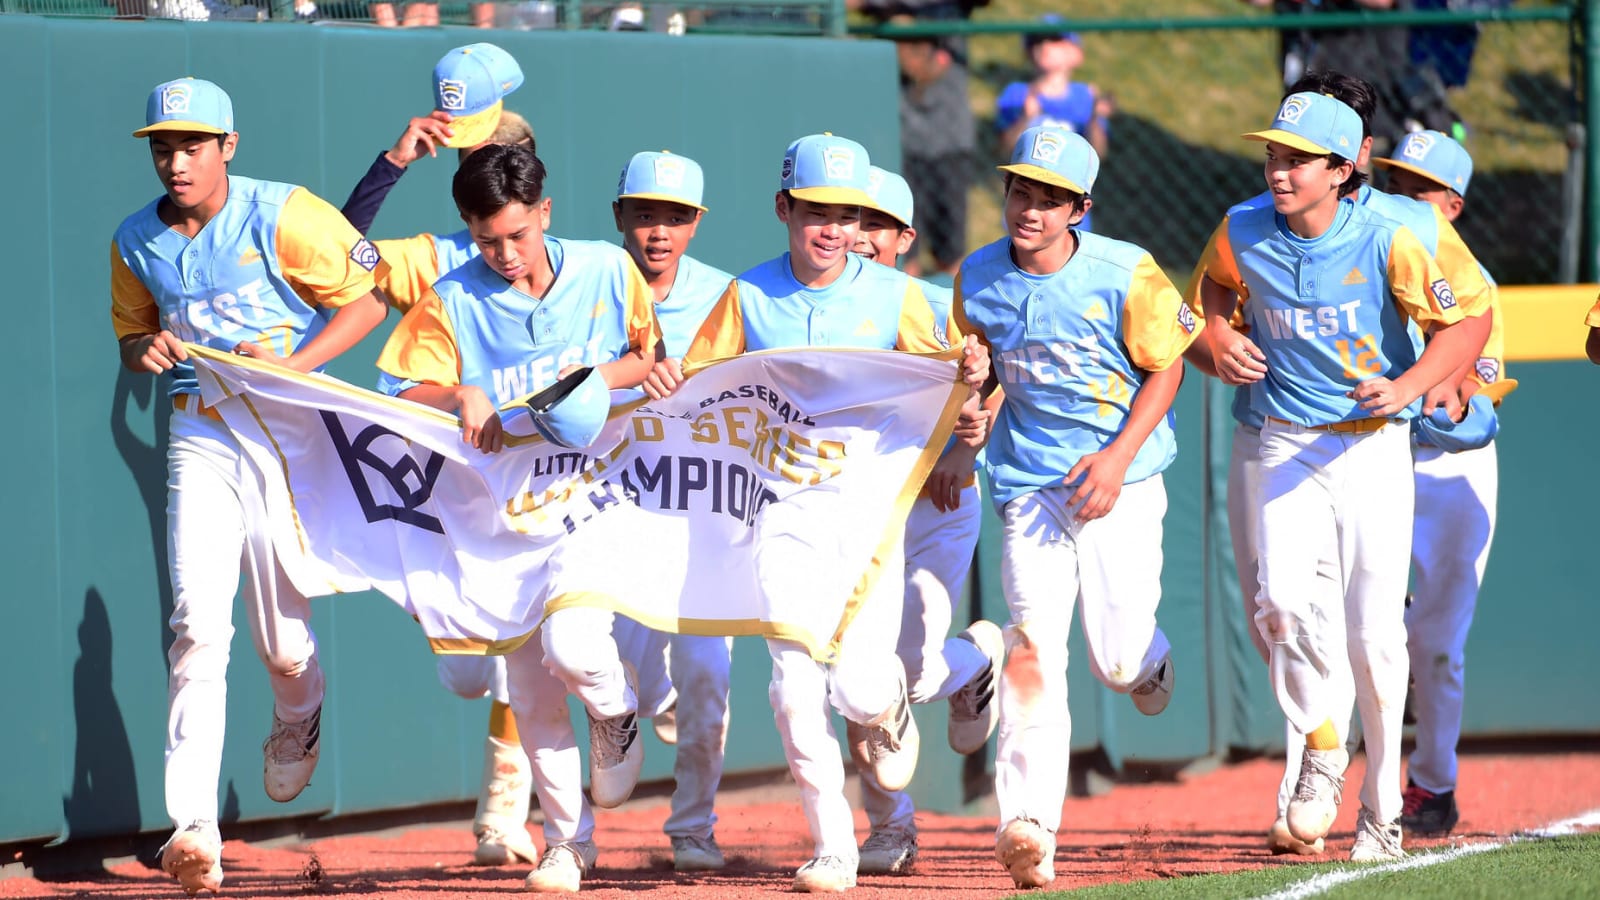 Watch: Walk-off single lifts Hawaii to LLWS title over Curacao